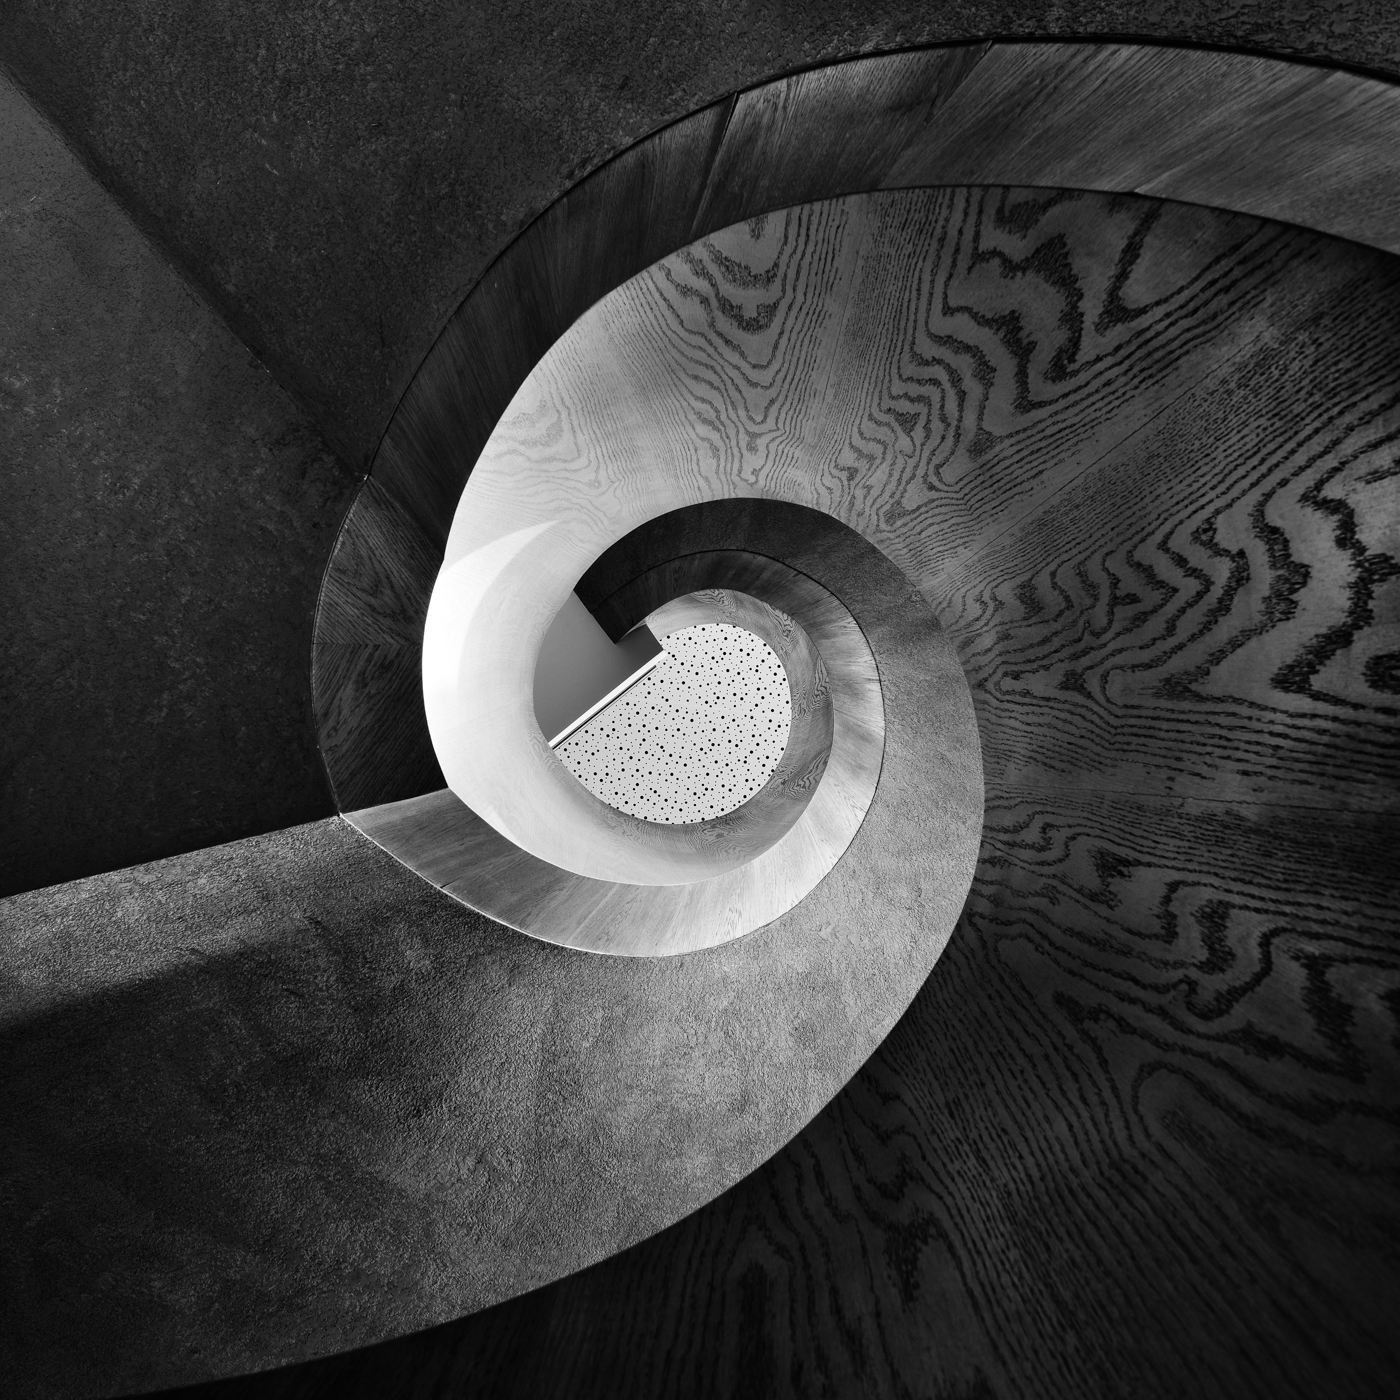 LOCATIONS | London's Spiral Staircases | Aaron Yeoman Photography